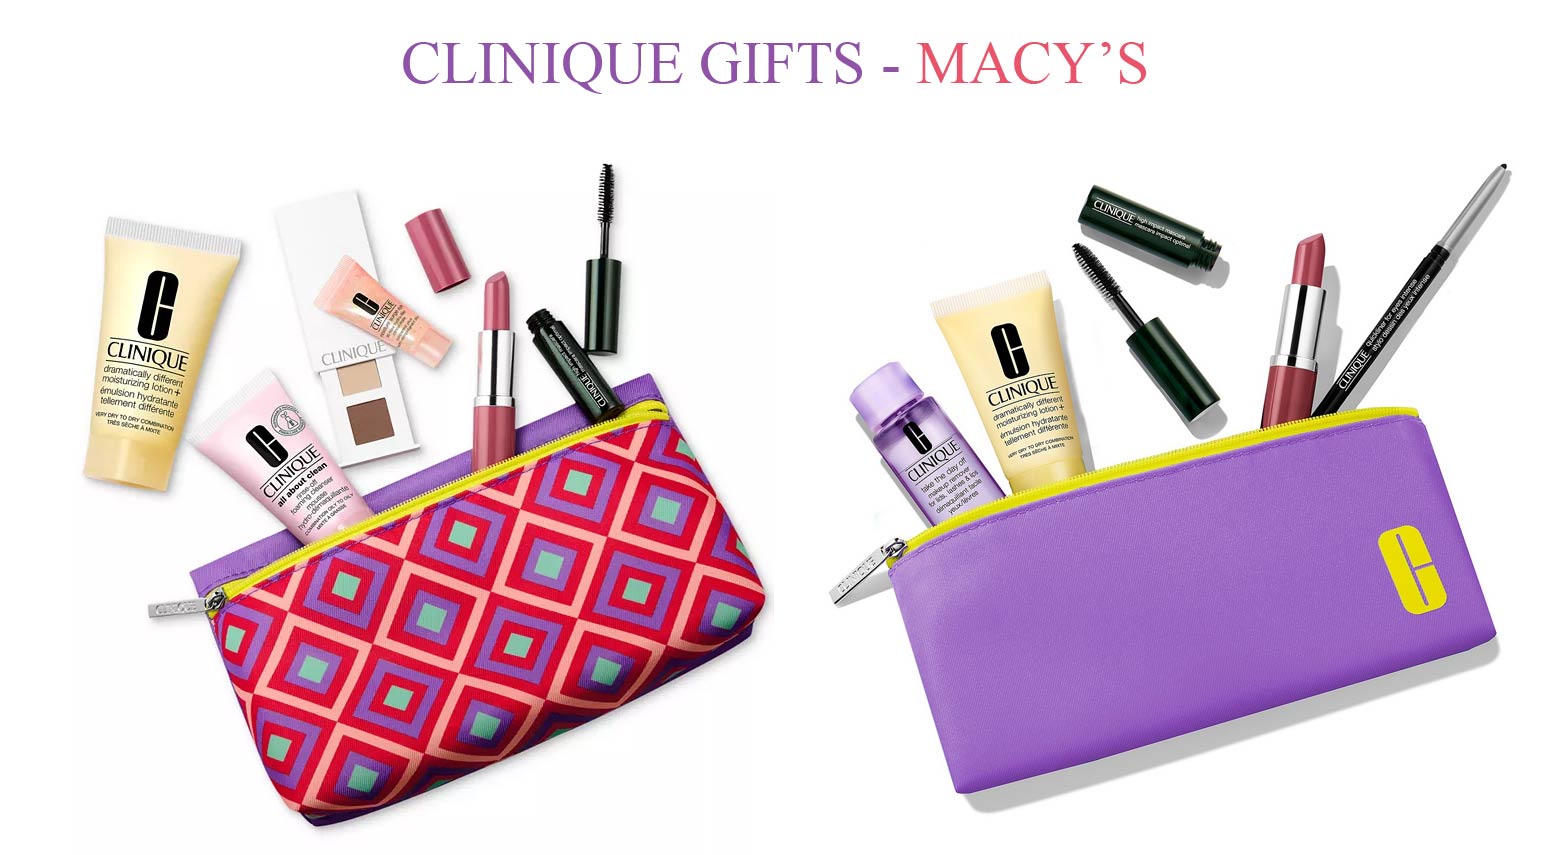 Clinique gifts at Macy's 2021